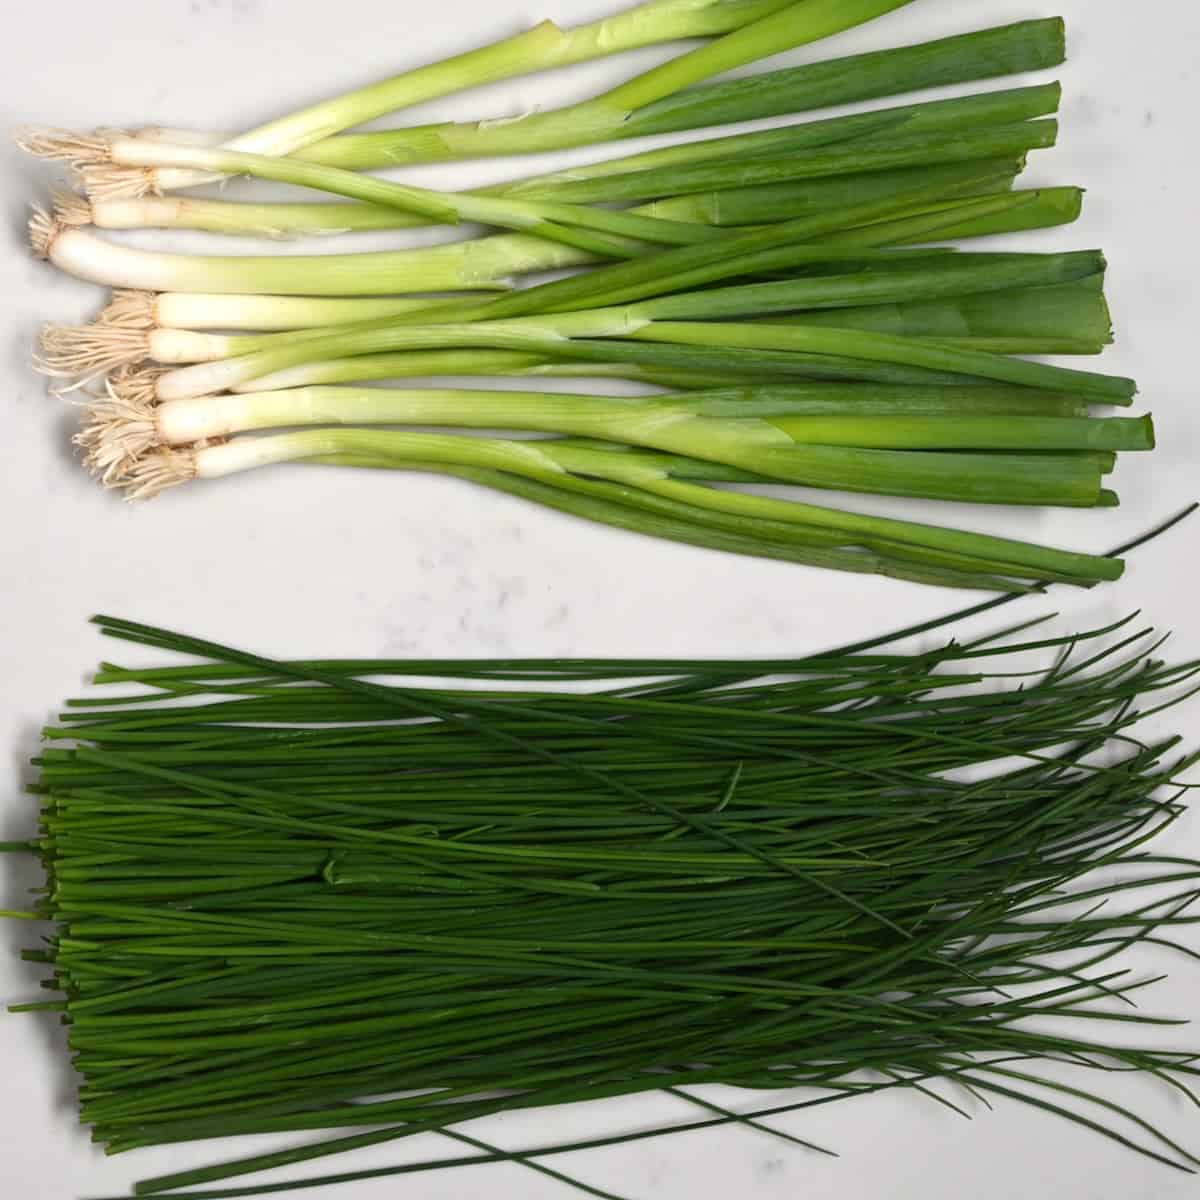 The difference between shallots, green onions, scallions and spring onions